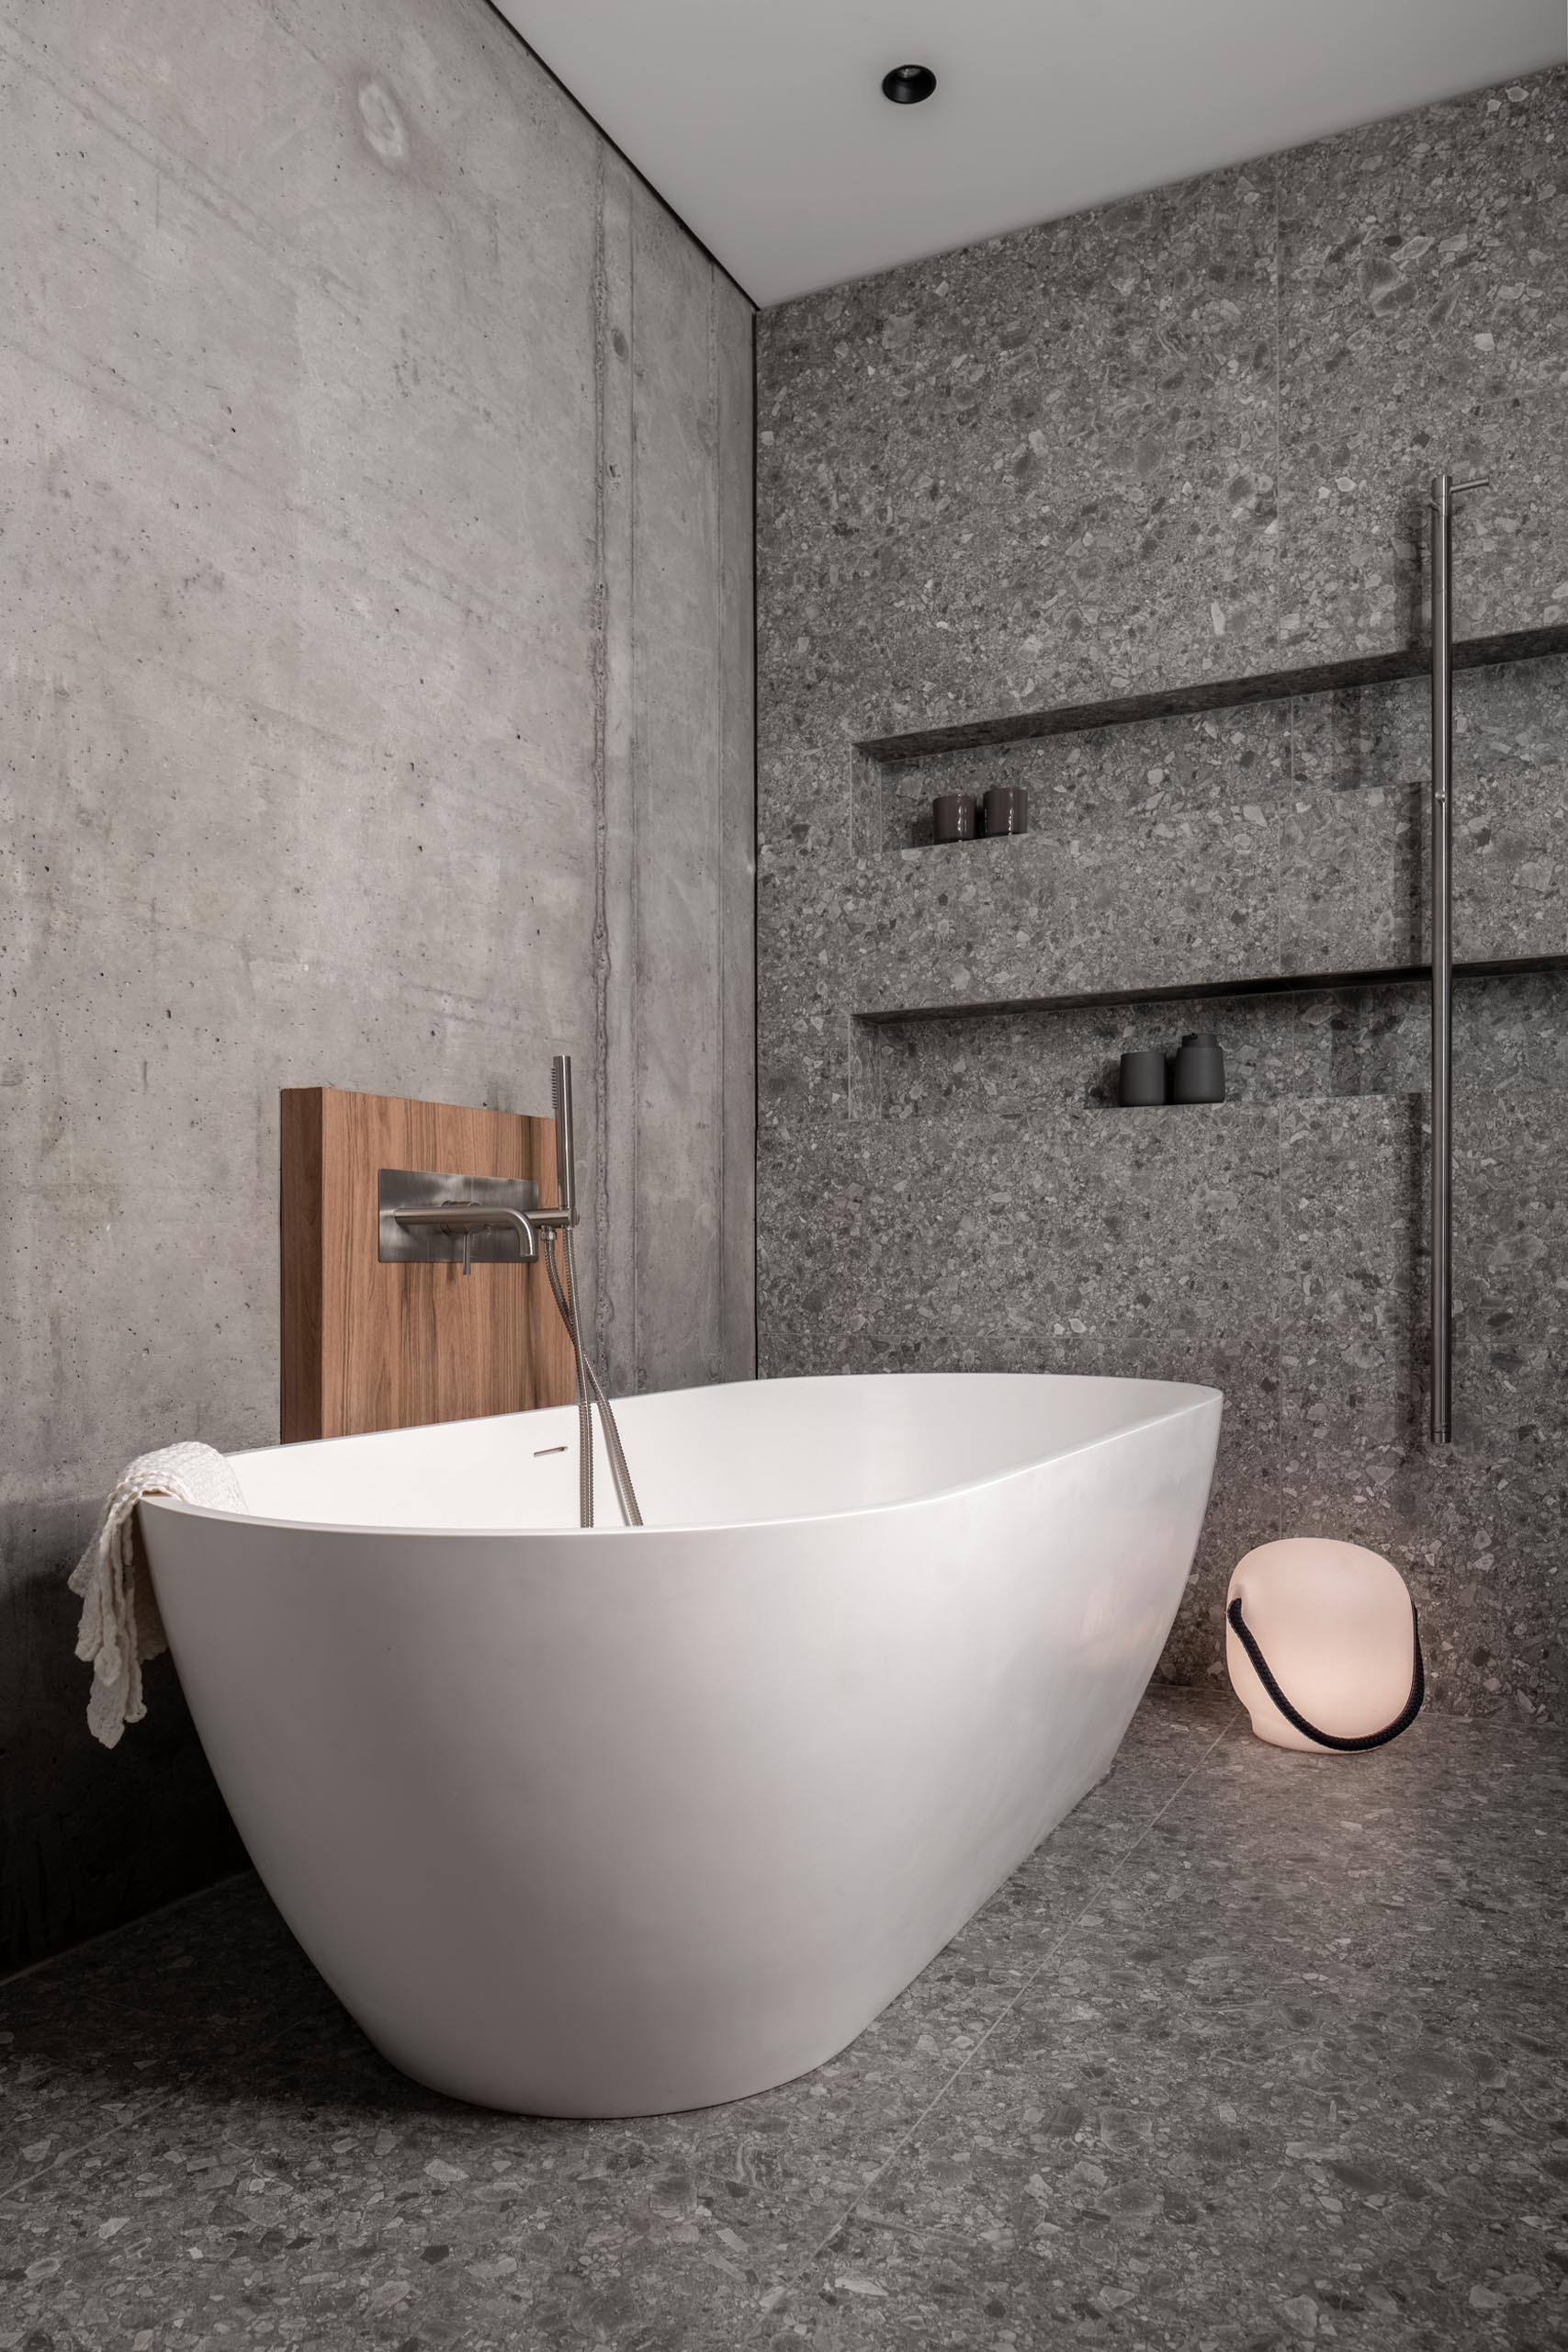 A modern bathroom with freestanding white bathtub and a shower with built-in shelving niches.